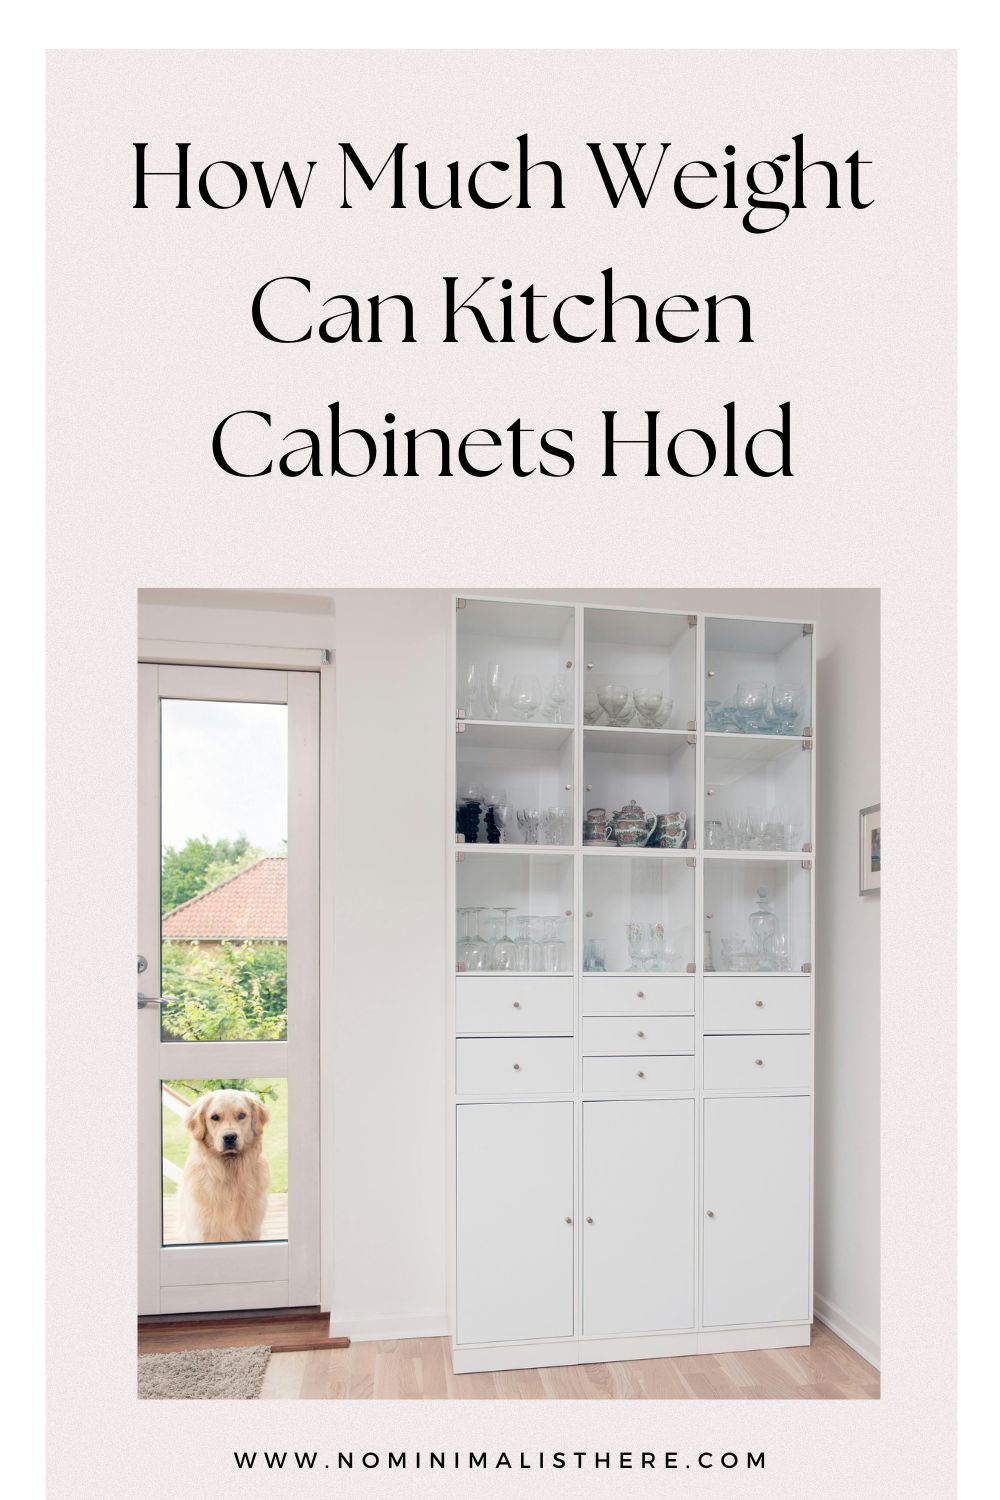 pinterest image for an article about How Much Weight Can Kitchen Cabinets Hold